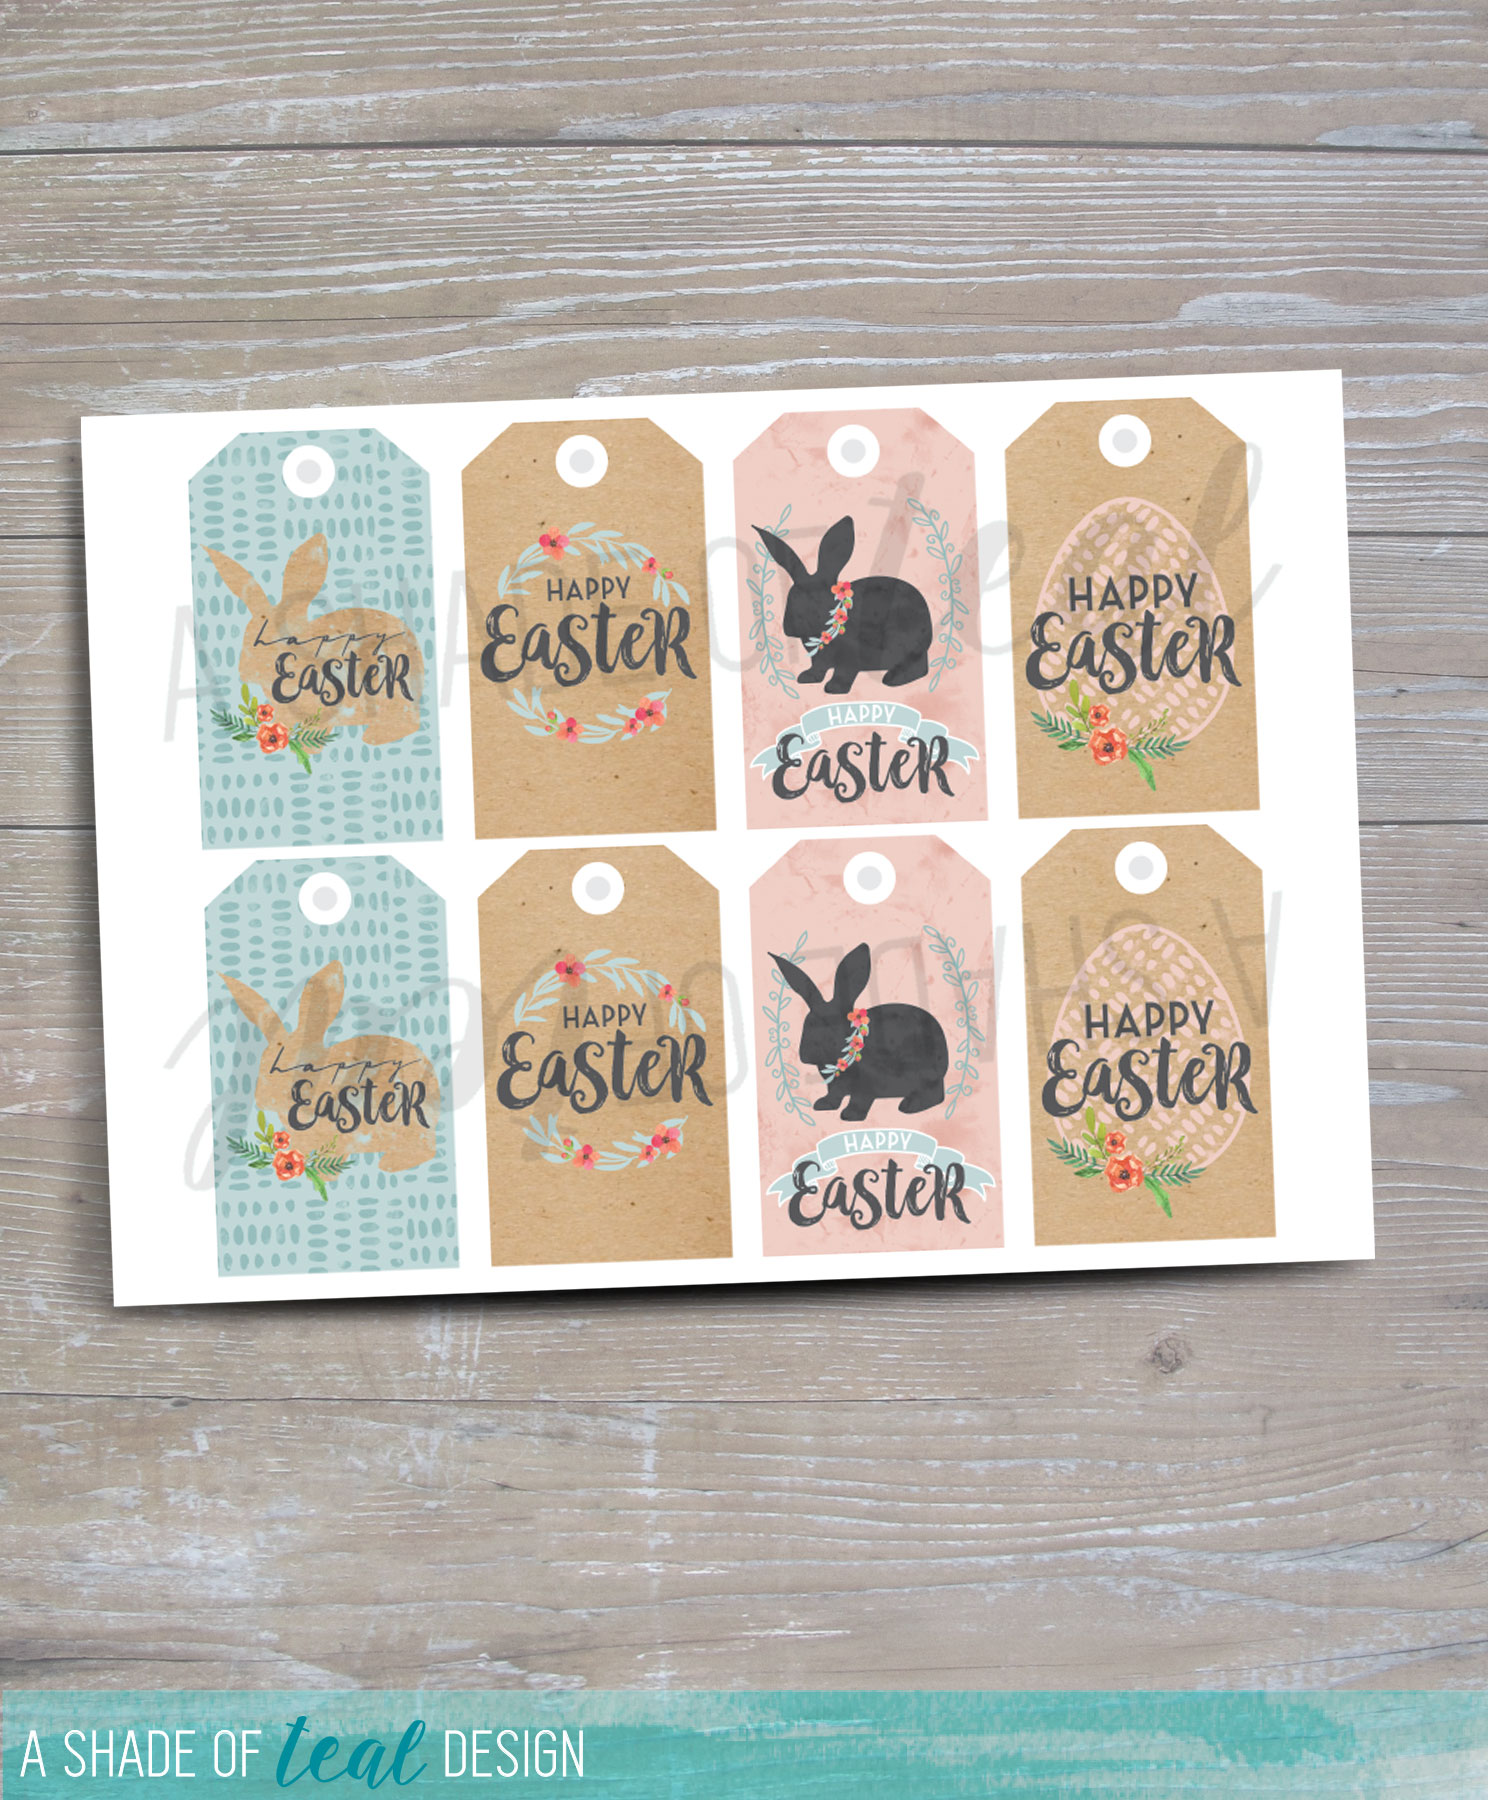 Happy Easter, with Easter Printables & GiftTags!